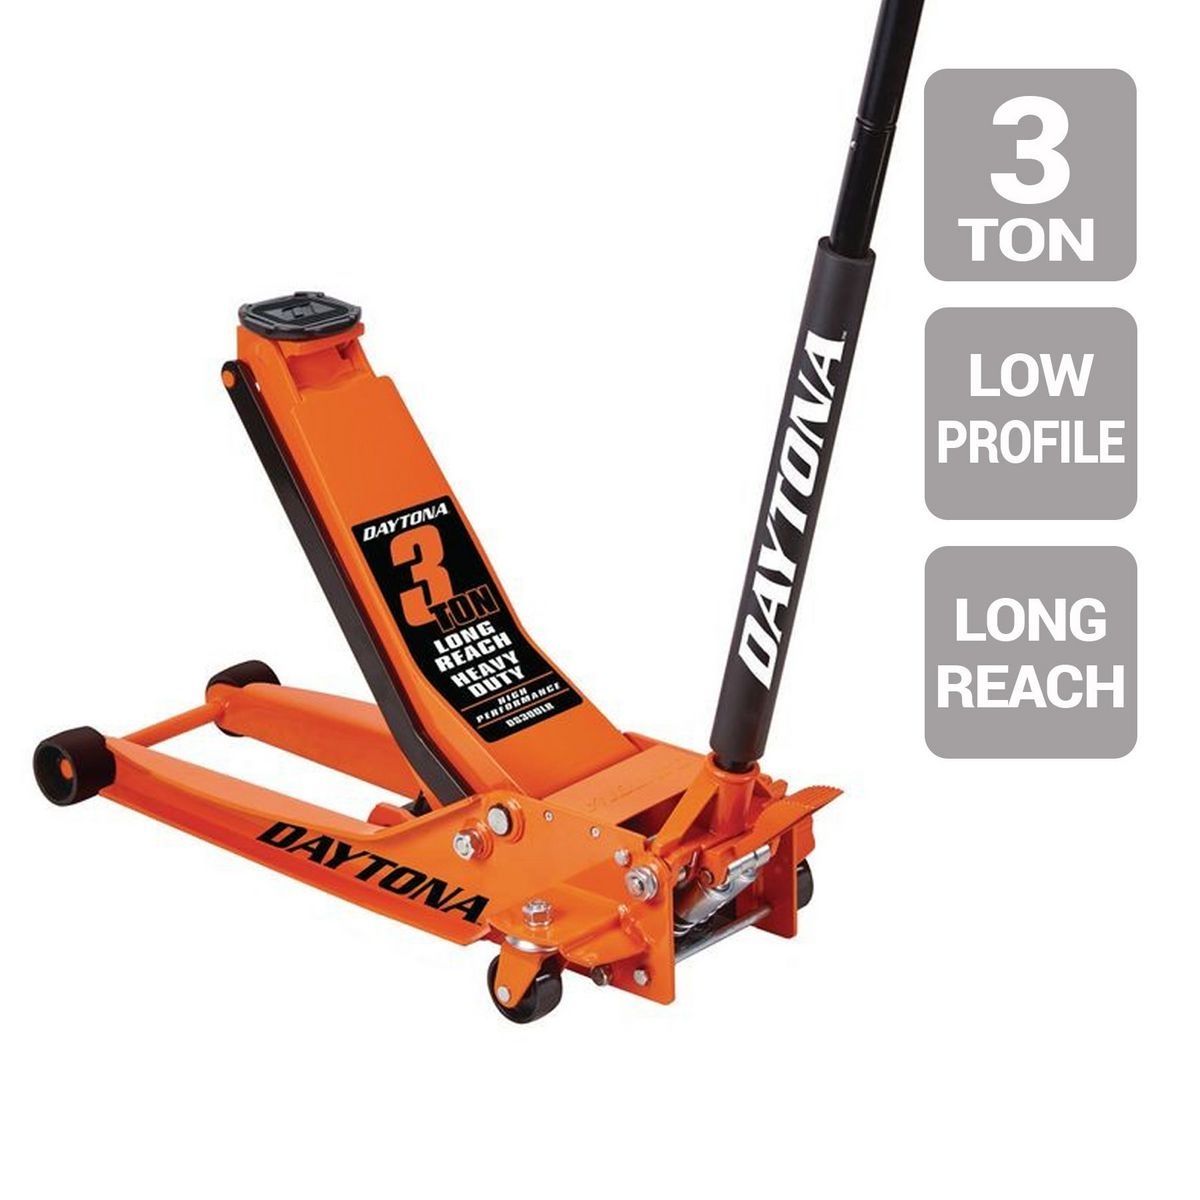 3 ton Long Reach Low Profile Professional Floor Jack with RAPID PUMP, Orange on Sale At Harbor Freight Tools